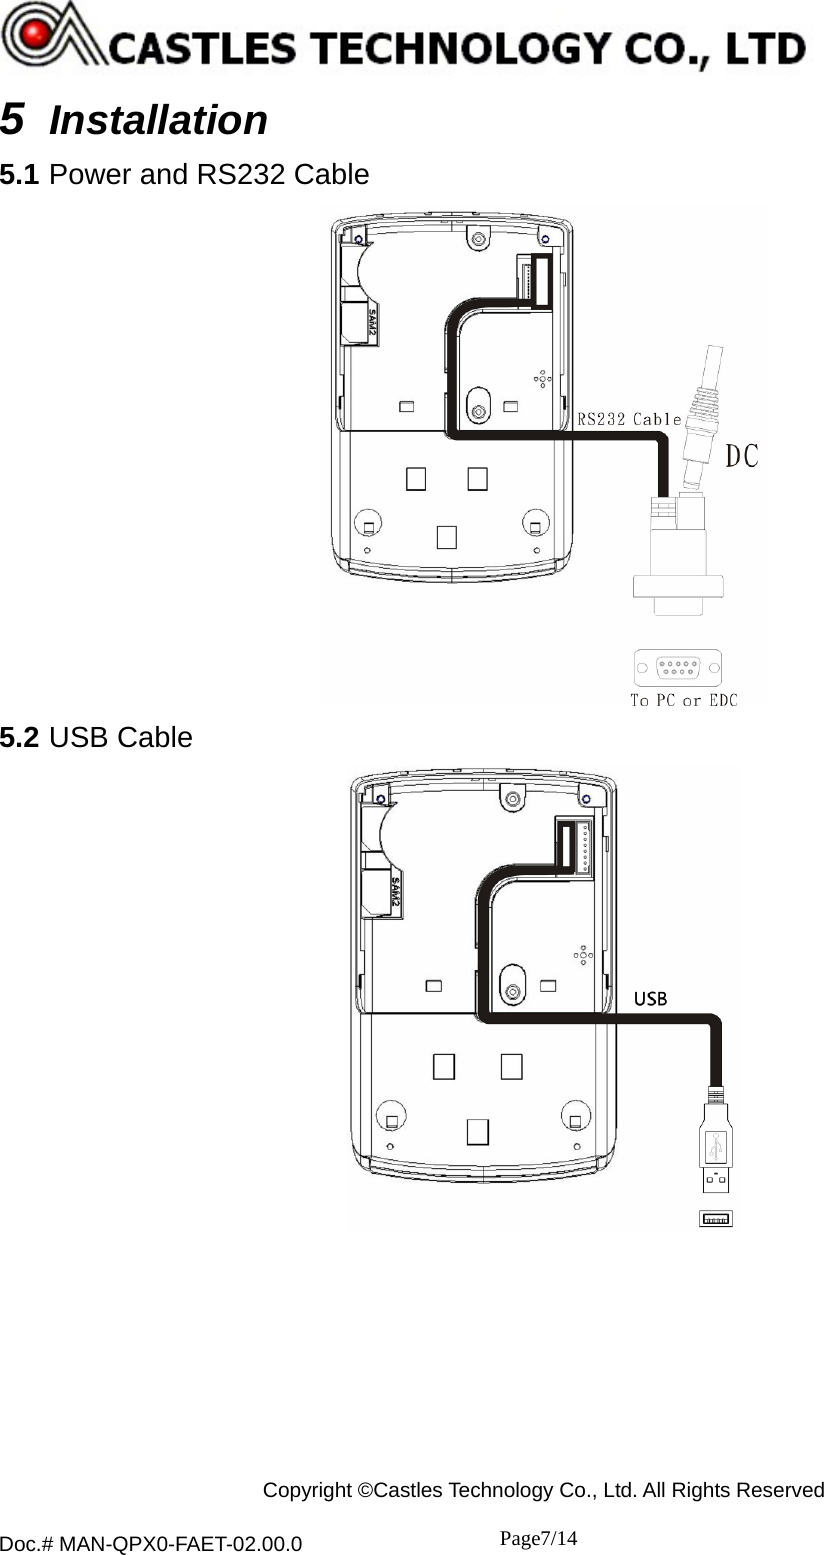  Copyright ©Castles Technology Co., Ltd. All Rights Reserved  Doc.# MAN-QPX0-FAET-02.00.0               Page7/14    5  Installation 5.1 Power and RS232 Cable  5.2 USB Cable  